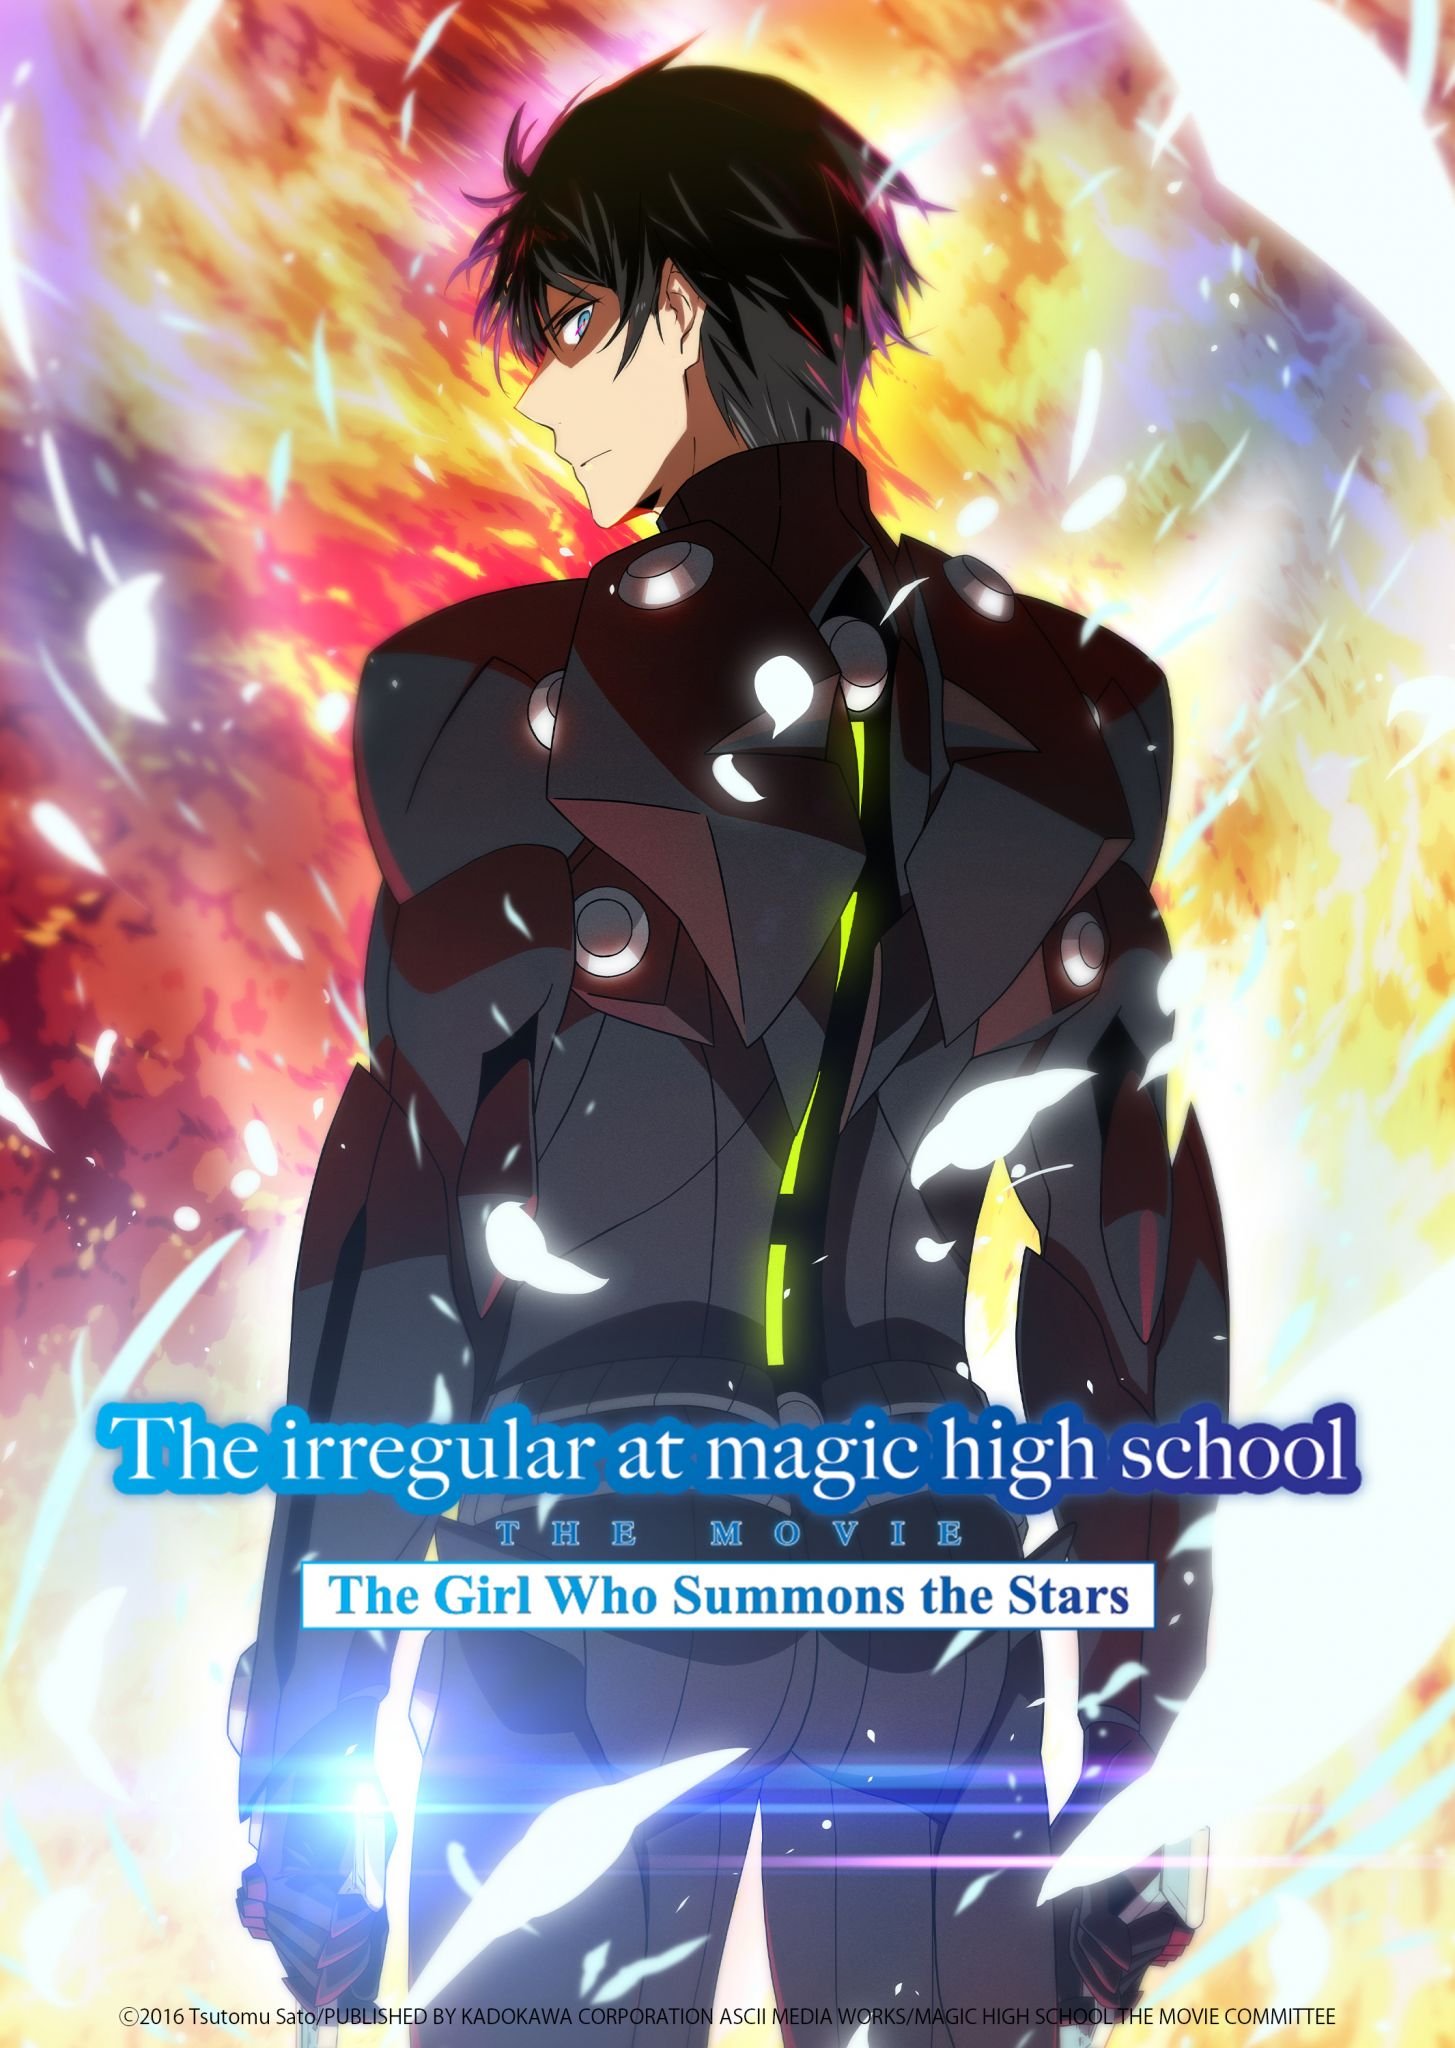 The Irregular at Magic High School Series And Movie Coming To Funimation